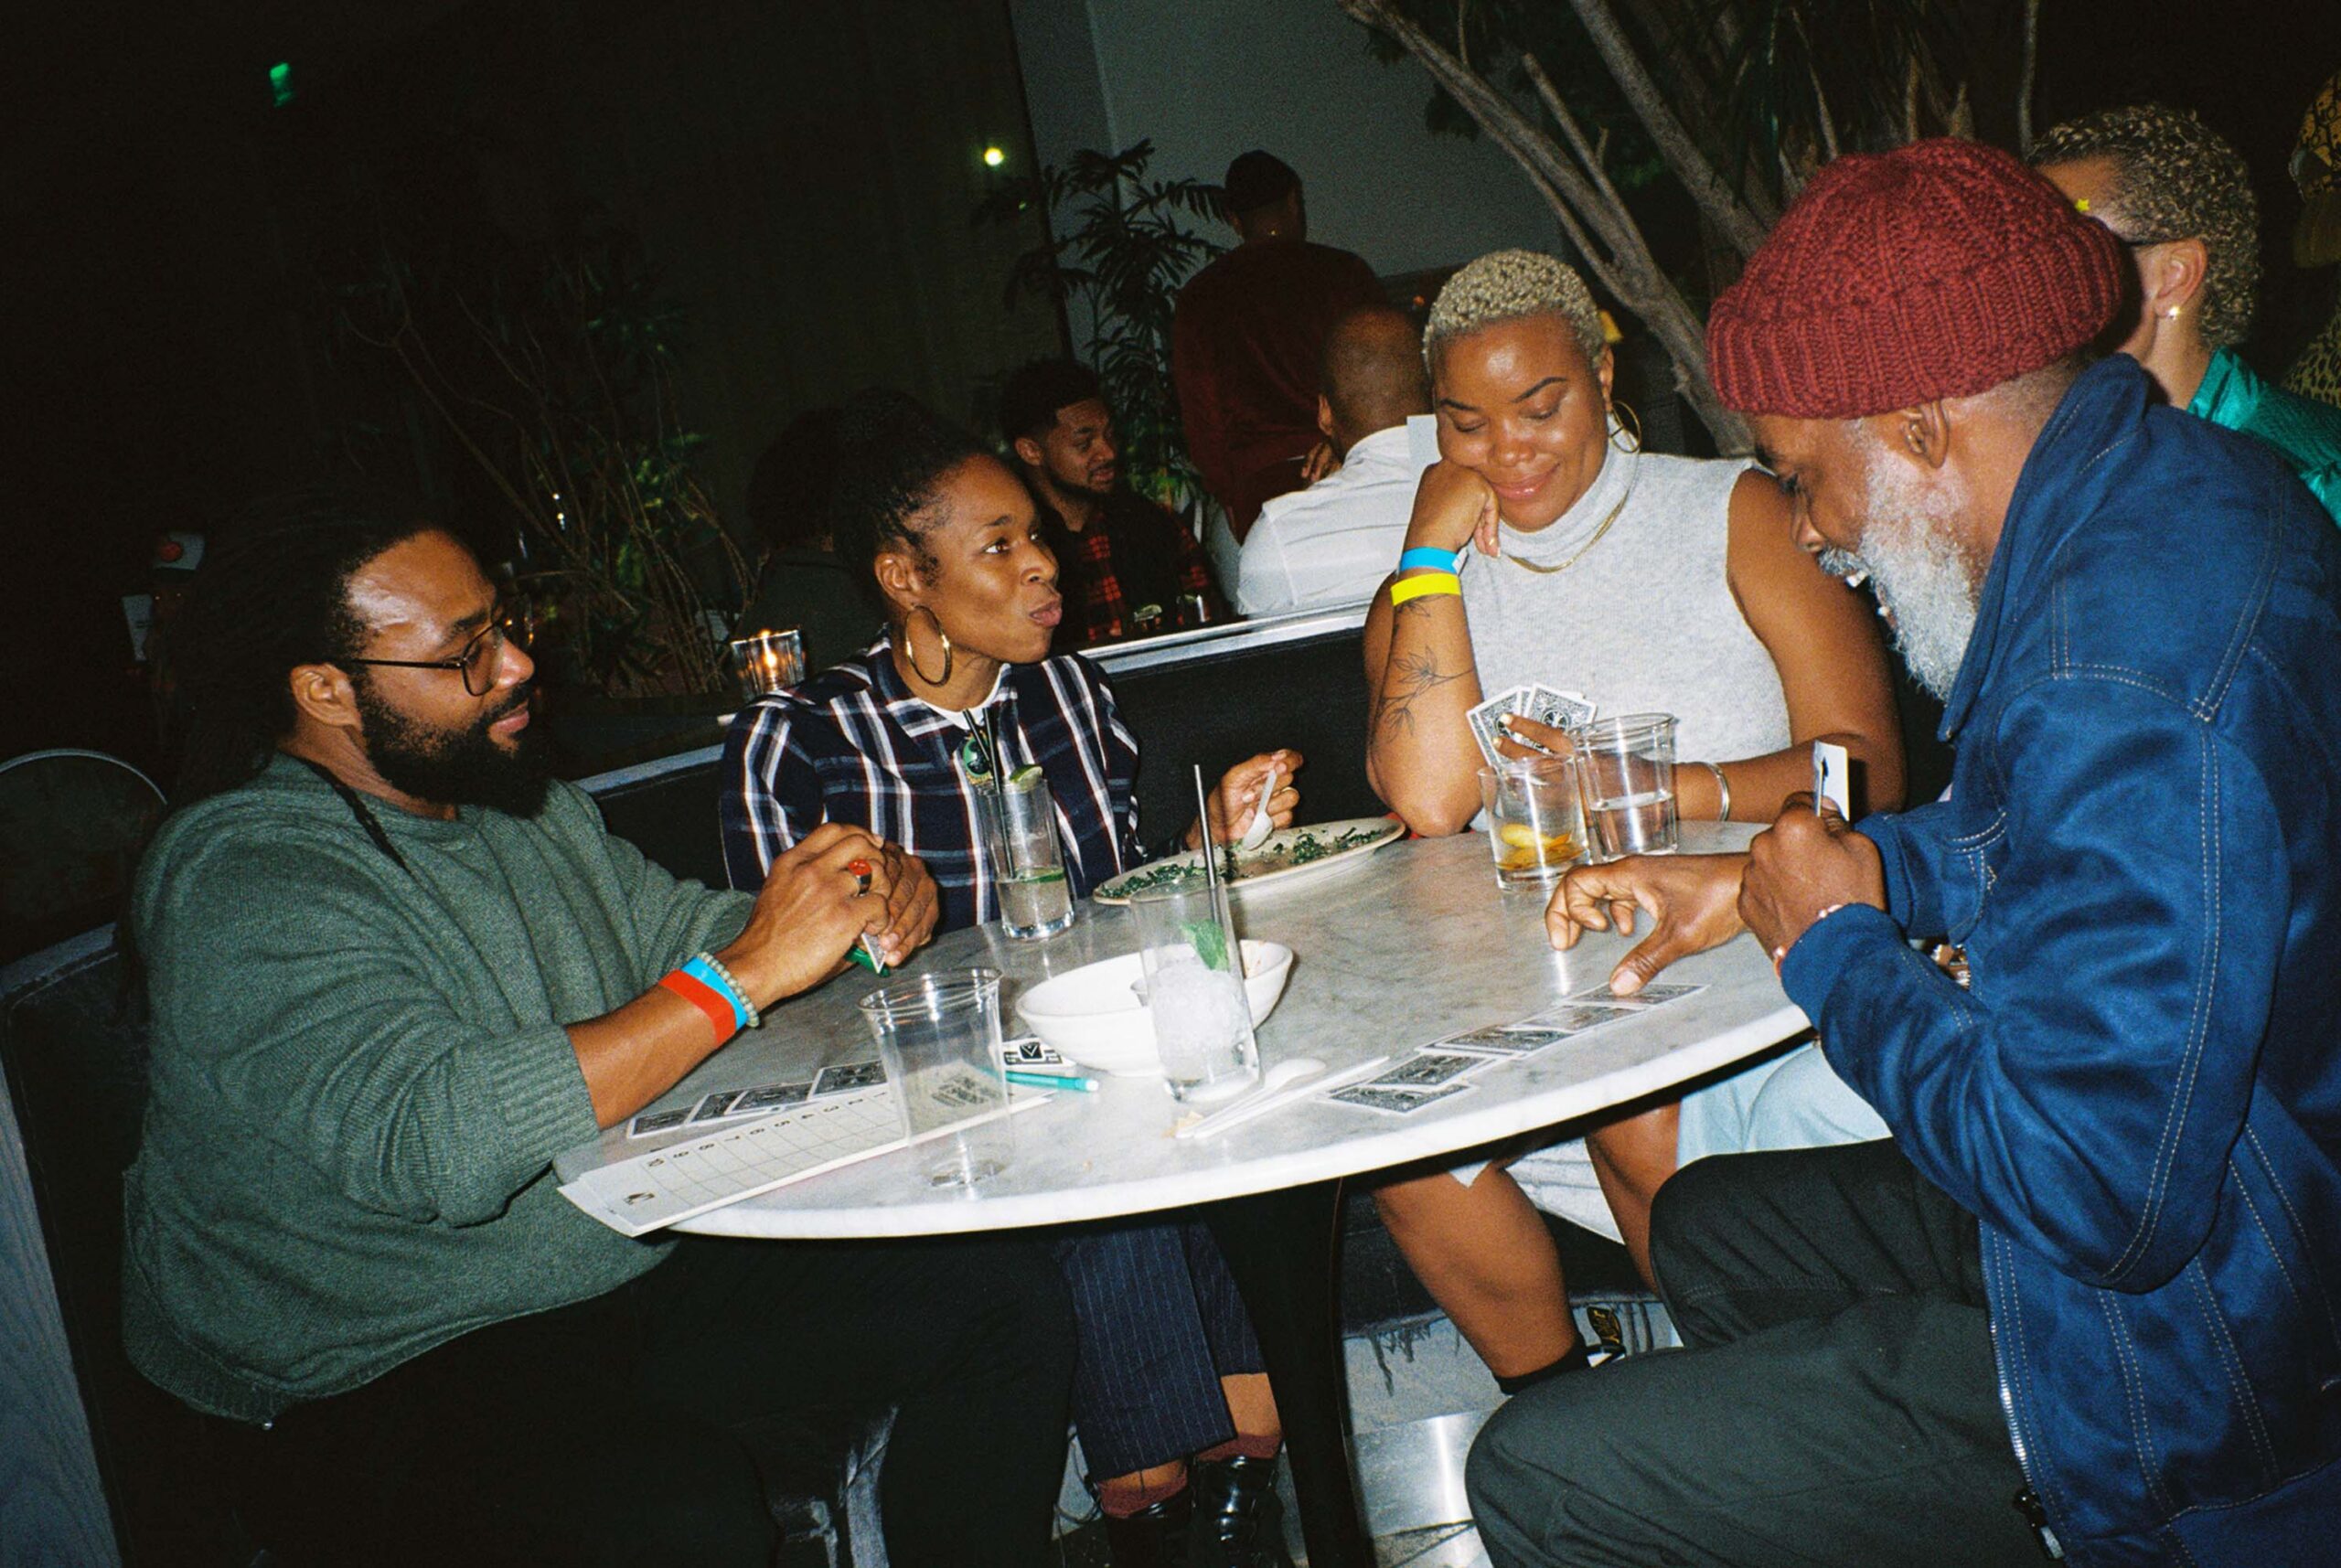 Five individuals at a table play cards, relishing their drinks in merriment.